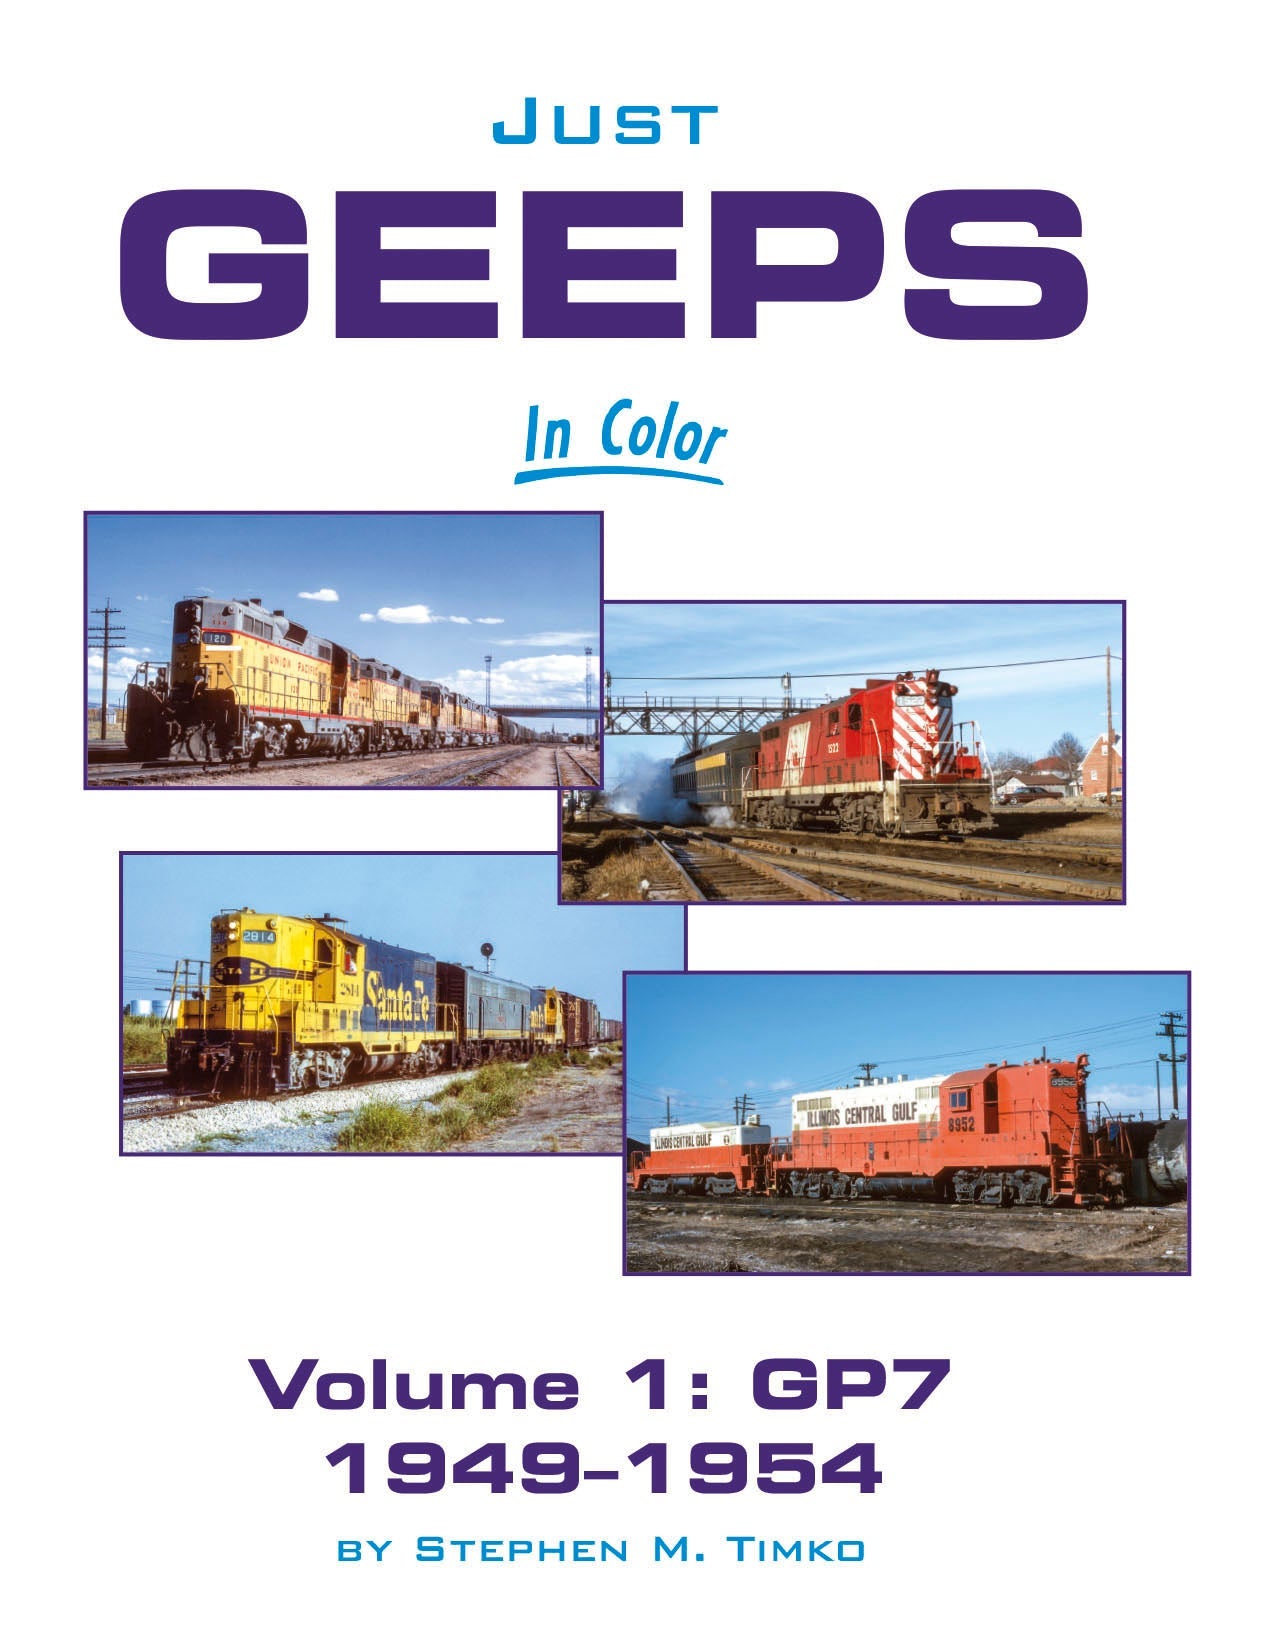 Morning Sun Books 1759 Just Geeps In Color Volume 1: GP7 1949-1954 Book